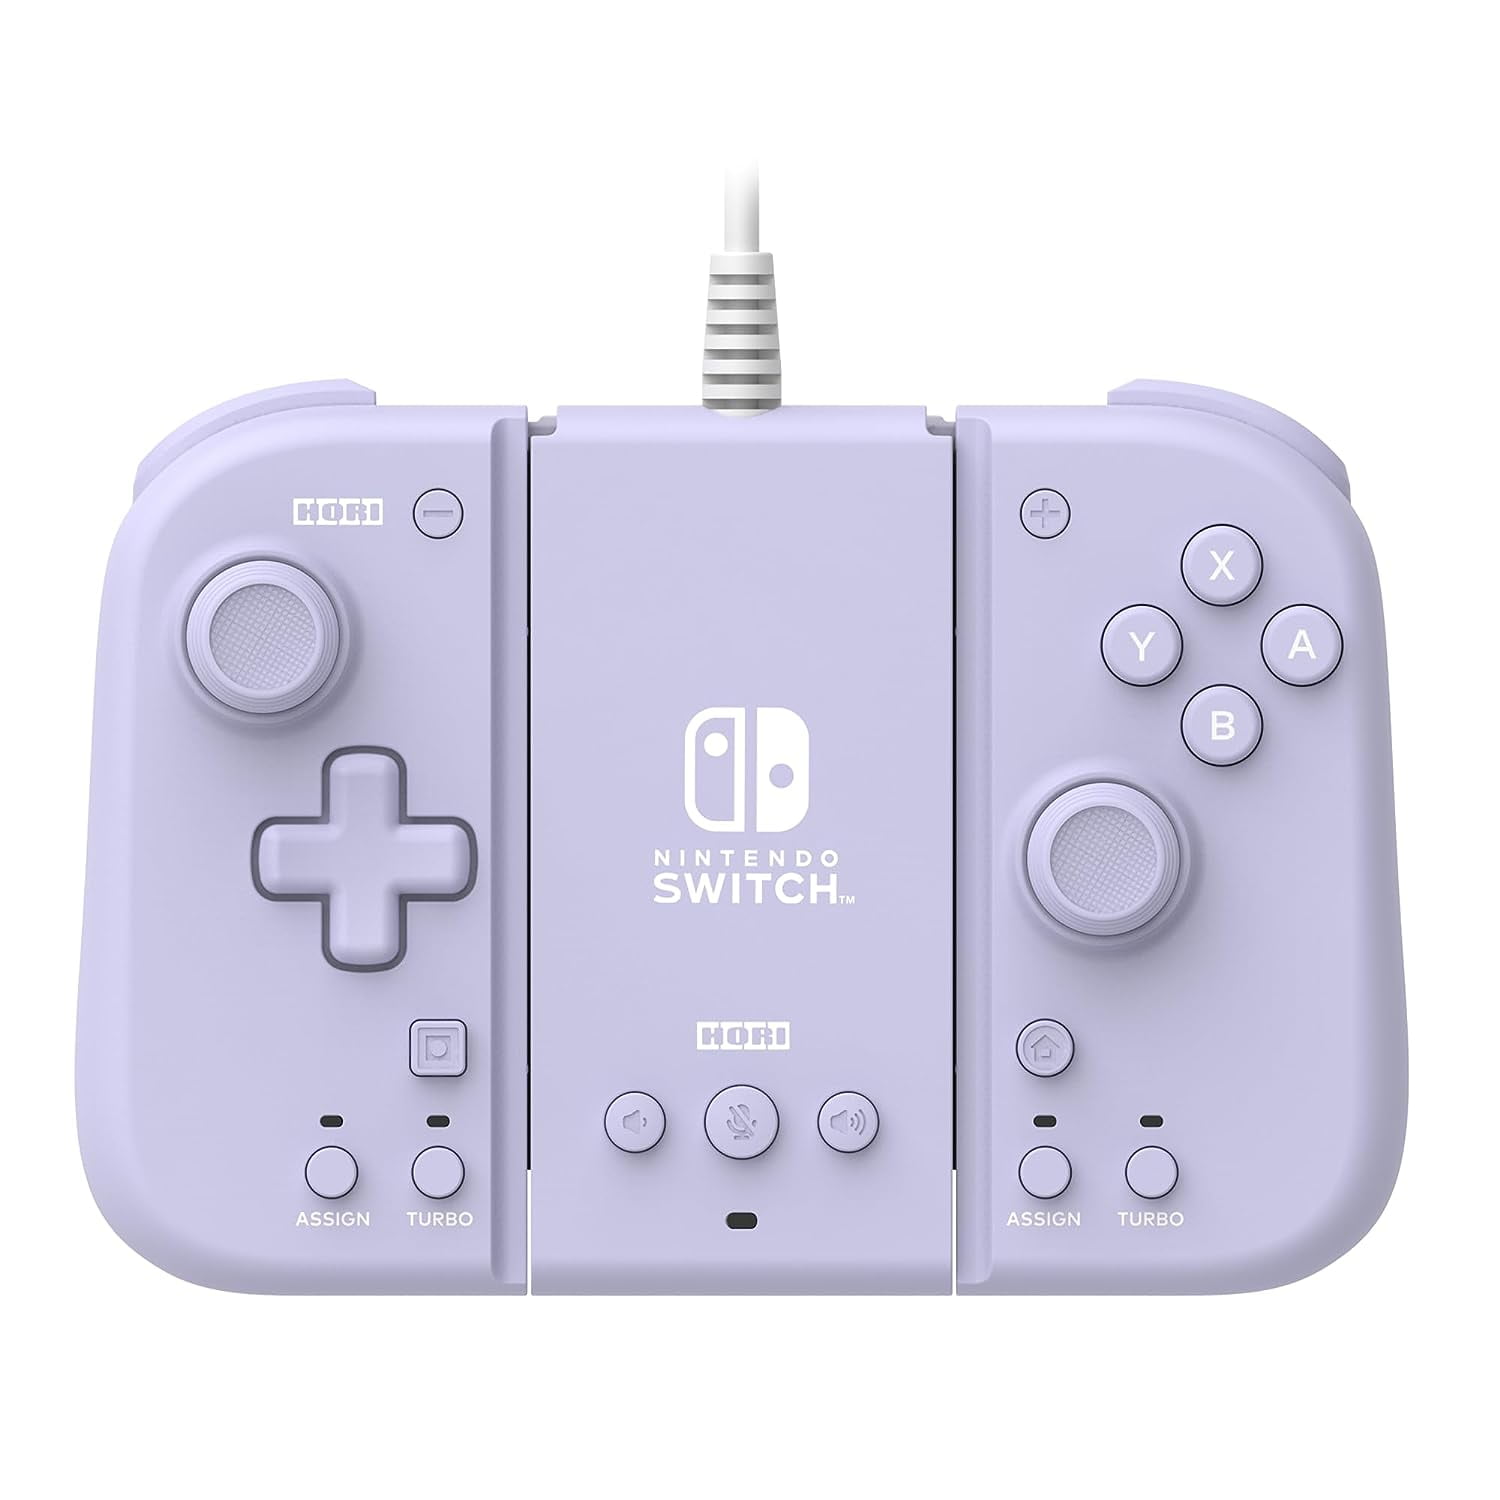 HORI Split Pad Compact Licensed (Lavender) Controllers for Nintendo Set OLED Nintendo Officially By - Switch/Switch Attachment